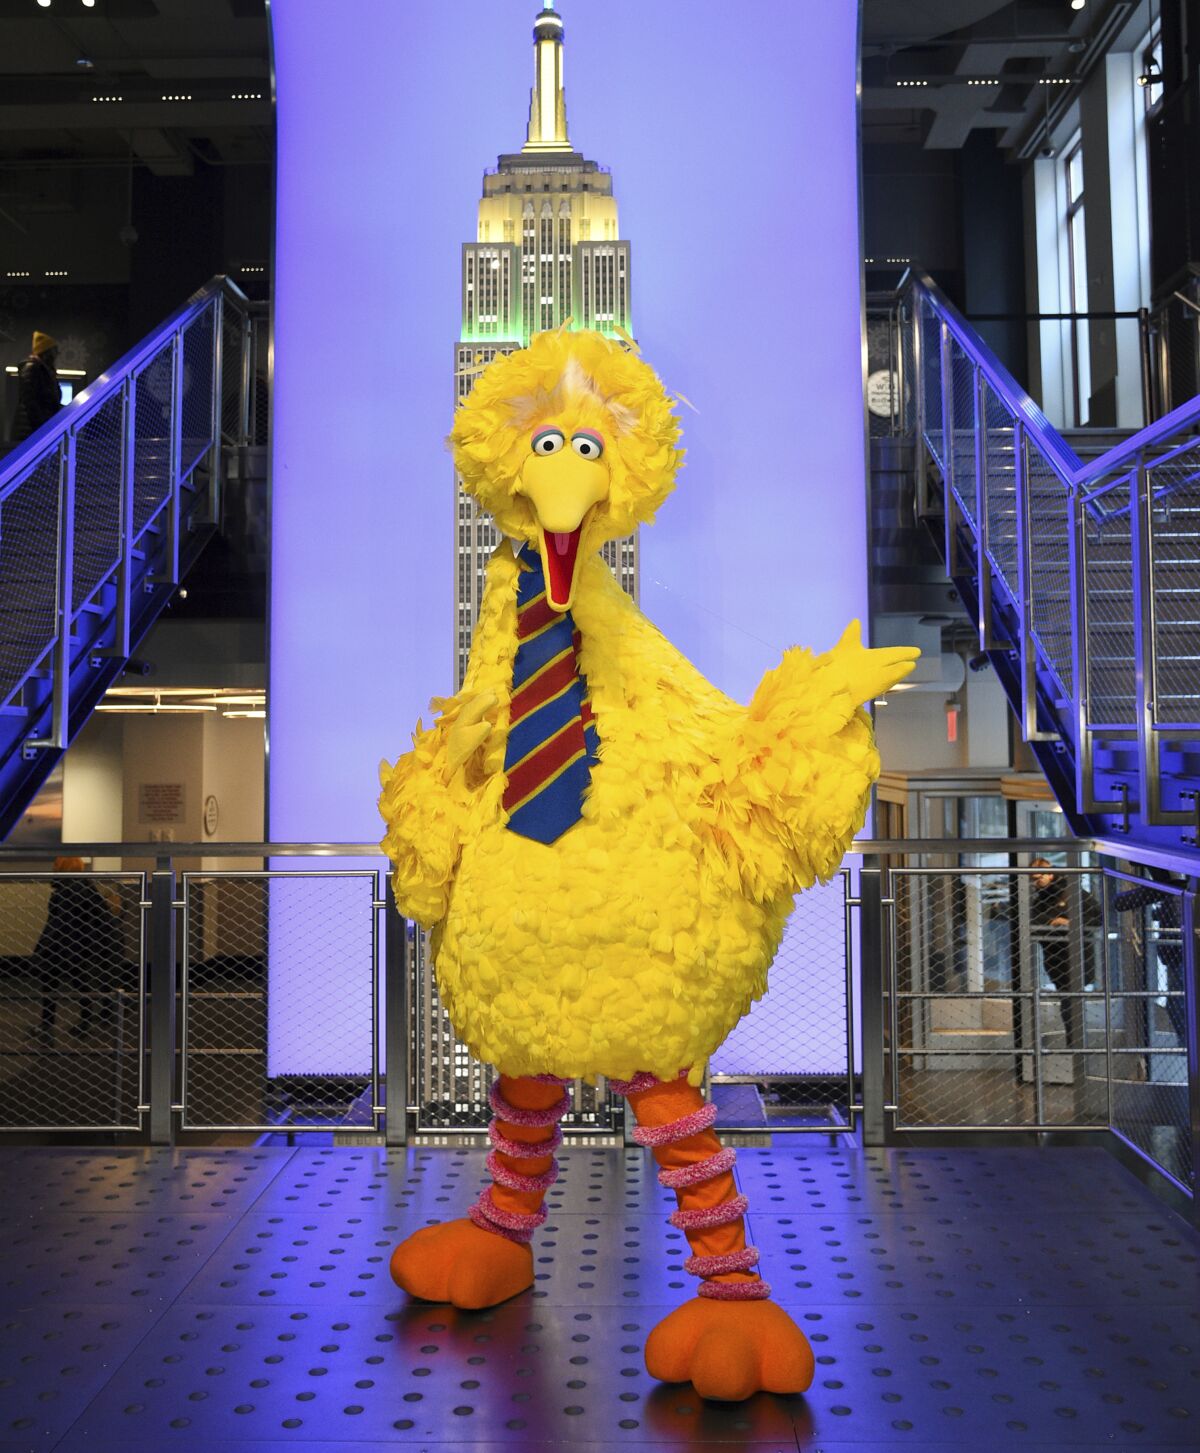 FILE - Sesame Street's Big Bird participates in the ceremonial lighting of the Empire State Building in honor of Sesame Street's 50th anniversary on Friday, Nov. 8, 2019, in New York. When Big Bird tweeted he had been vaccinated against COVID-19, conservative politicians immediately pushed back, including Ted Cruz who grilled Big Bird for what he called “government propaganda.” (Photo by Evan Agostini/Invision/AP, File)